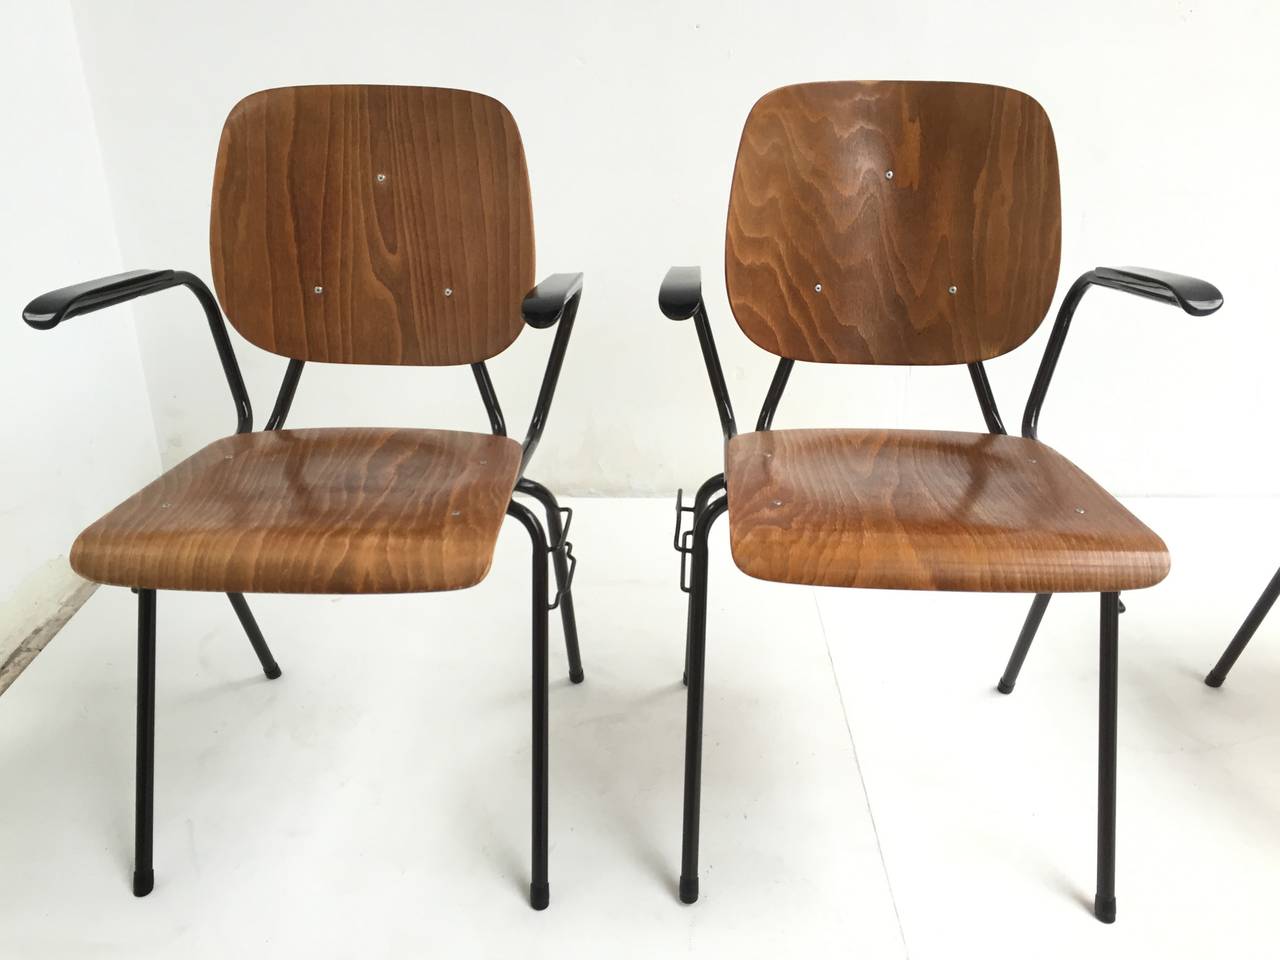 Bakelite Kho Liang Le Stackable and Linkable Chairs with Armrests Model 305 for CAR, 1957 For Sale